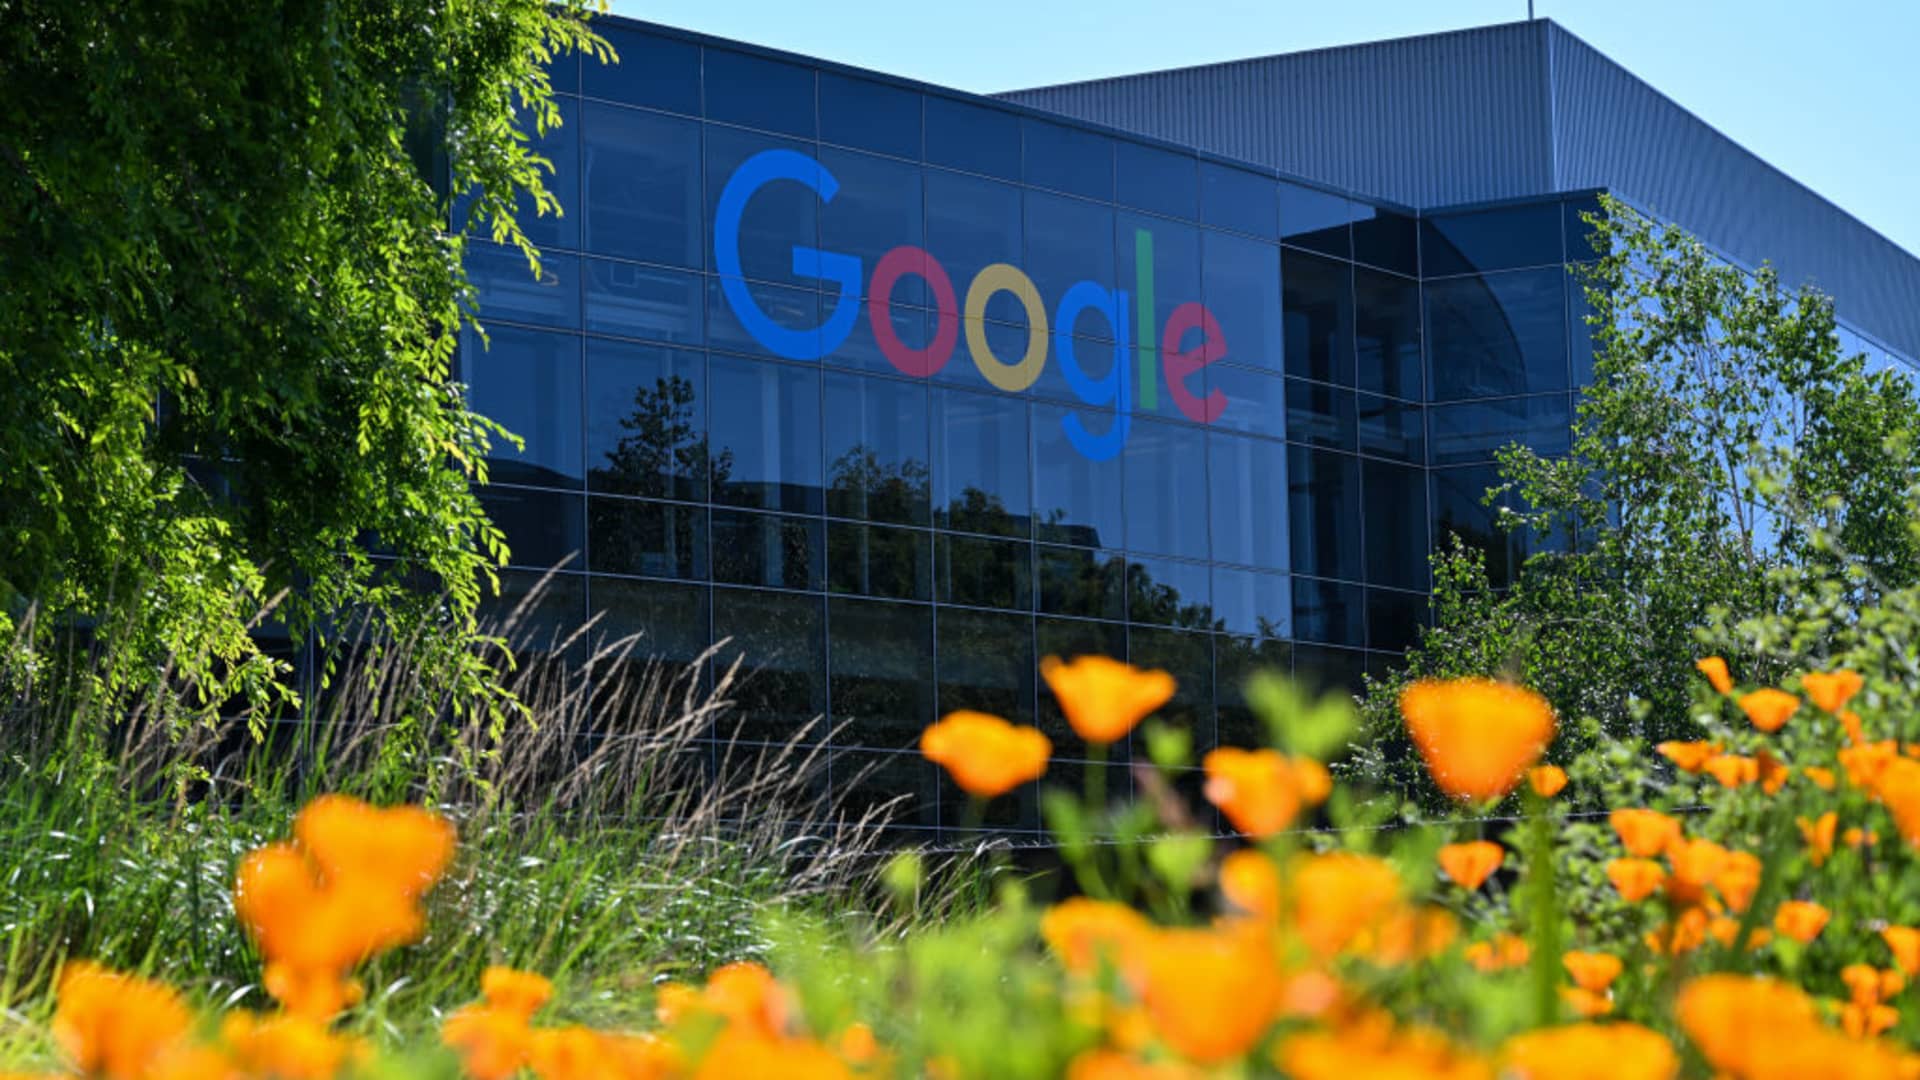 Google Headquarters is seen in Mountain View, California, United States on May 15, 2023.